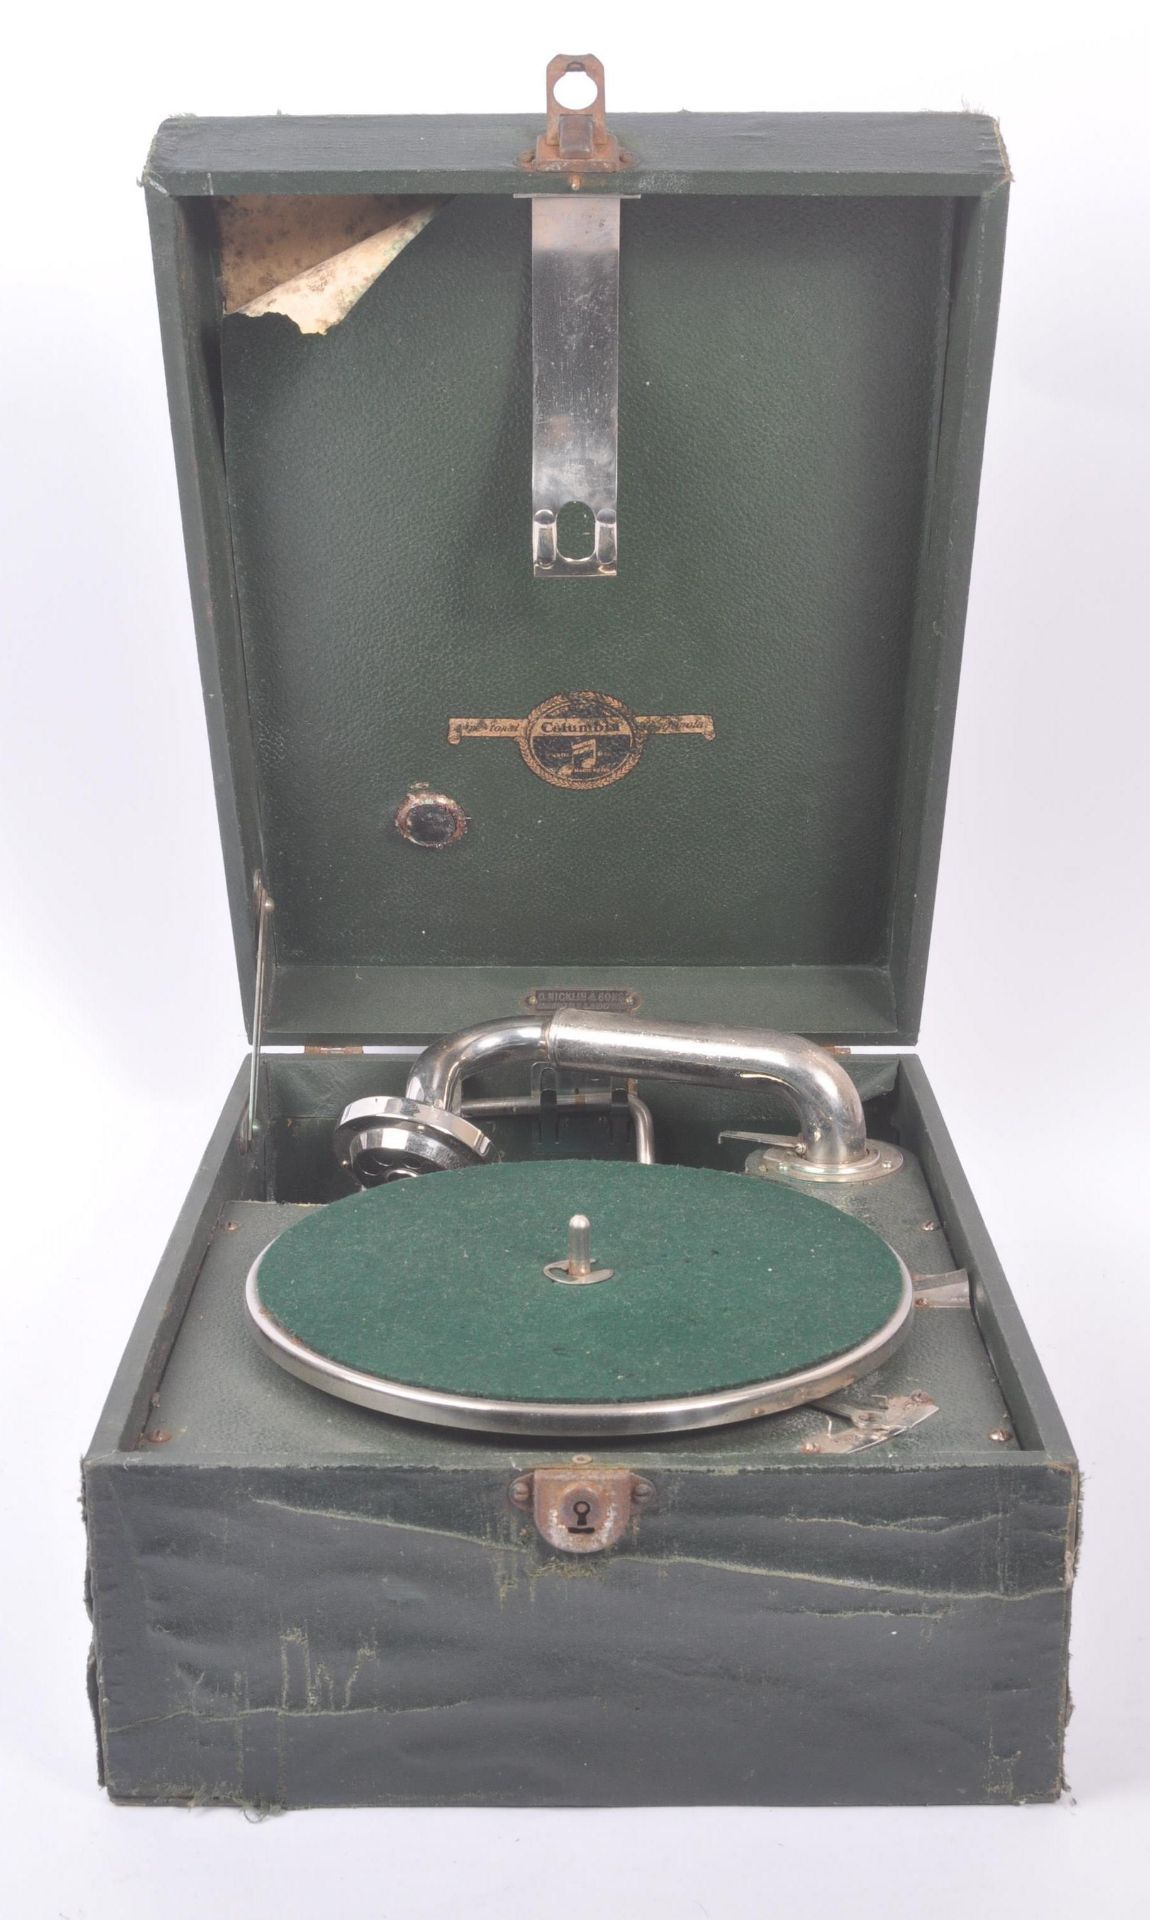 TWO VINTAGE 20TH CENTURY GRAMOPHONE RECORD PLAYERS - Image 5 of 8